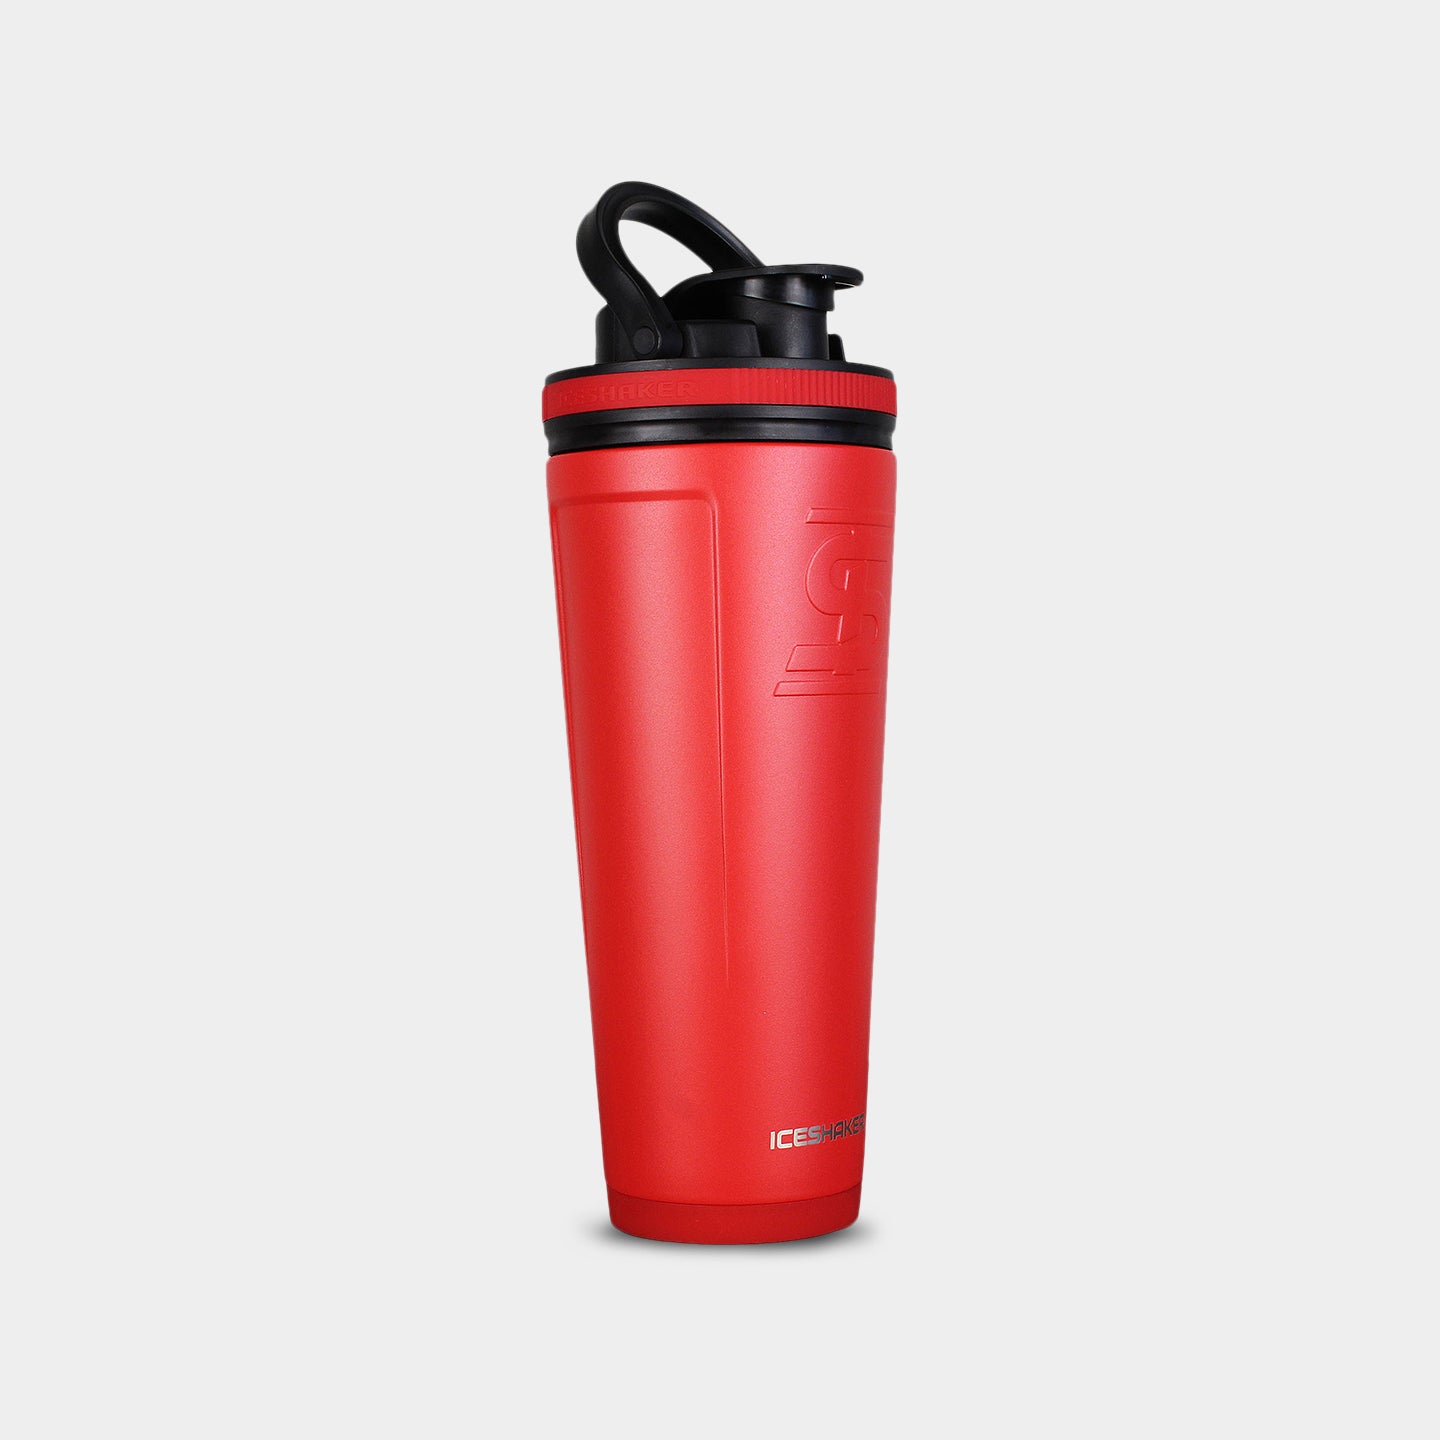 Ice Shaker 36oz. Shaker 36oz. Red A1